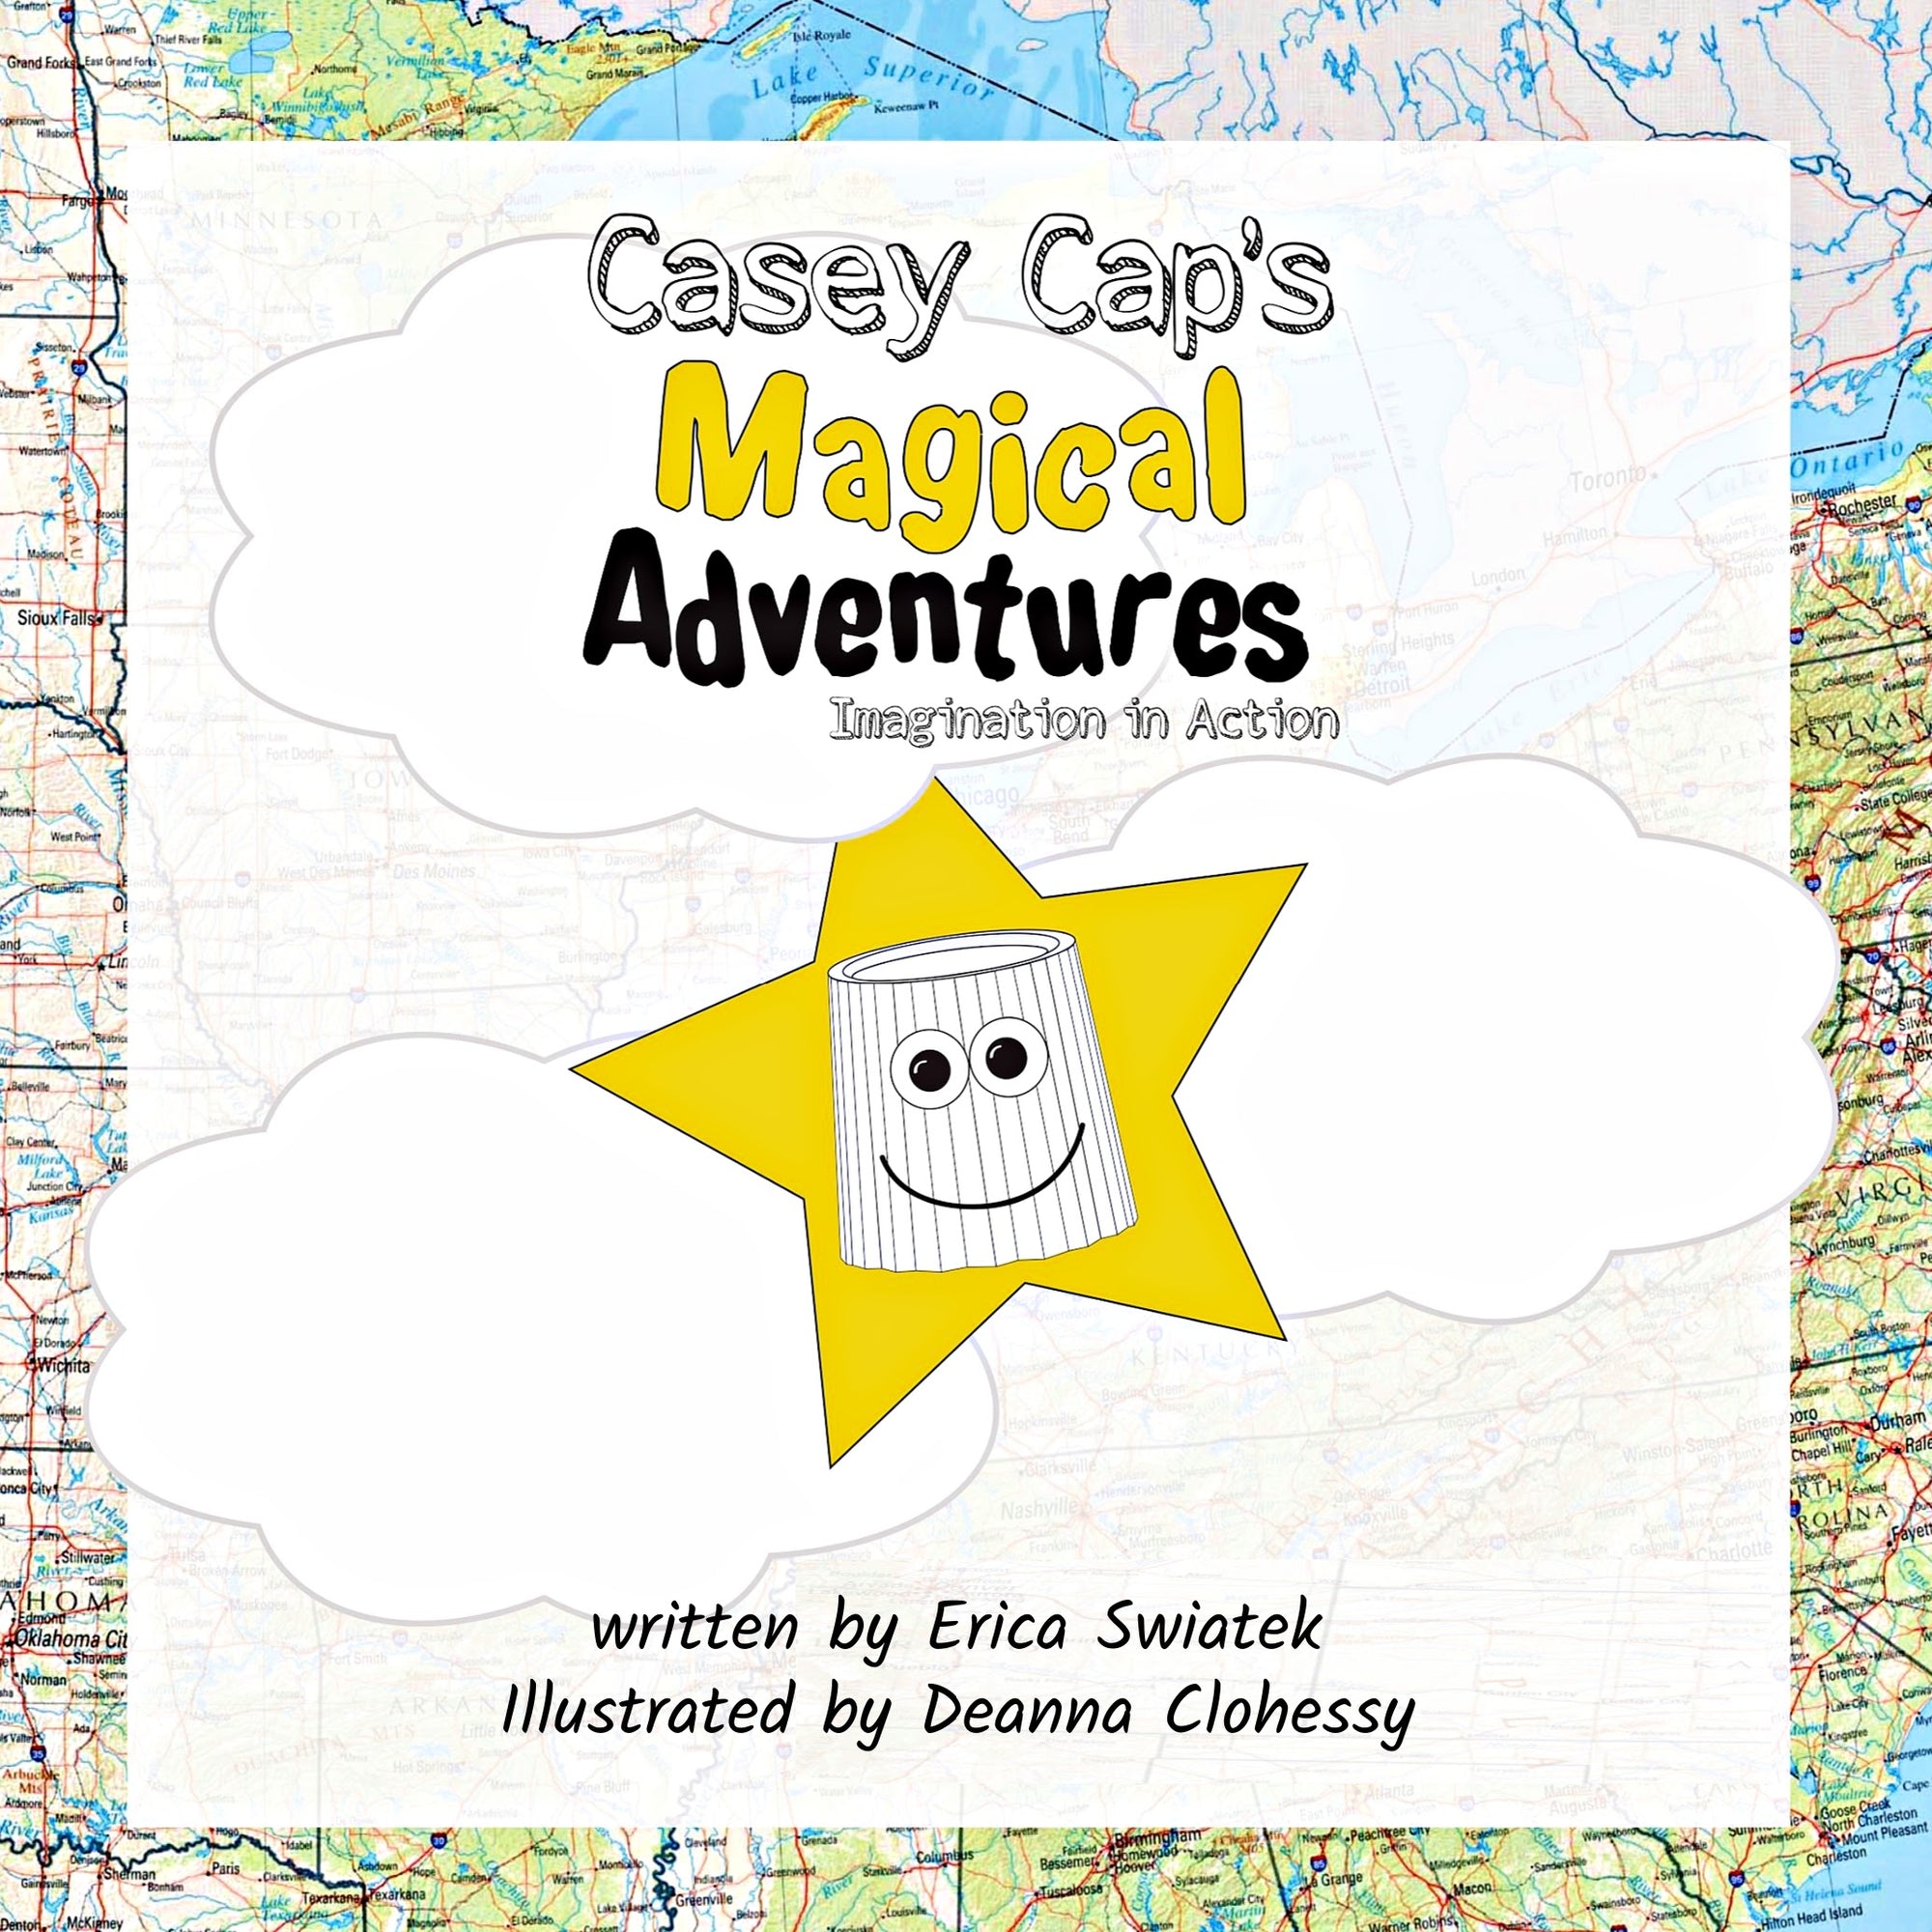 Casey Cap's Magical Adventures: Imagination in Action - ImagineWe Publishers